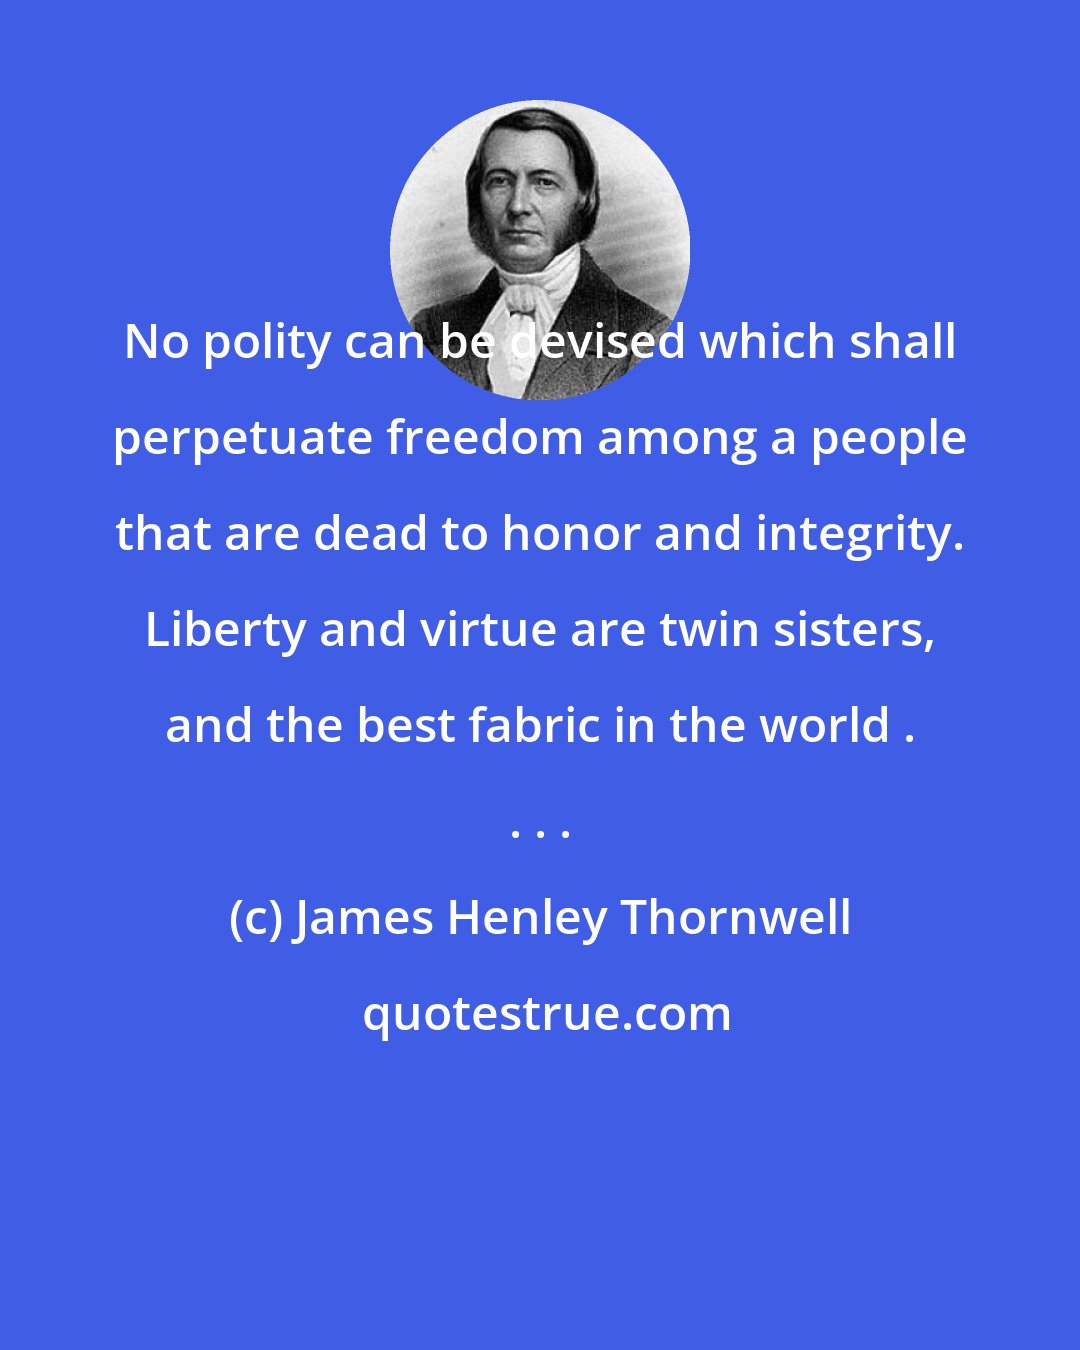 James Henley Thornwell: No polity can be devised which shall perpetuate freedom among a people that are dead to honor and integrity. Liberty and virtue are twin sisters, and the best fabric in the world . . . .